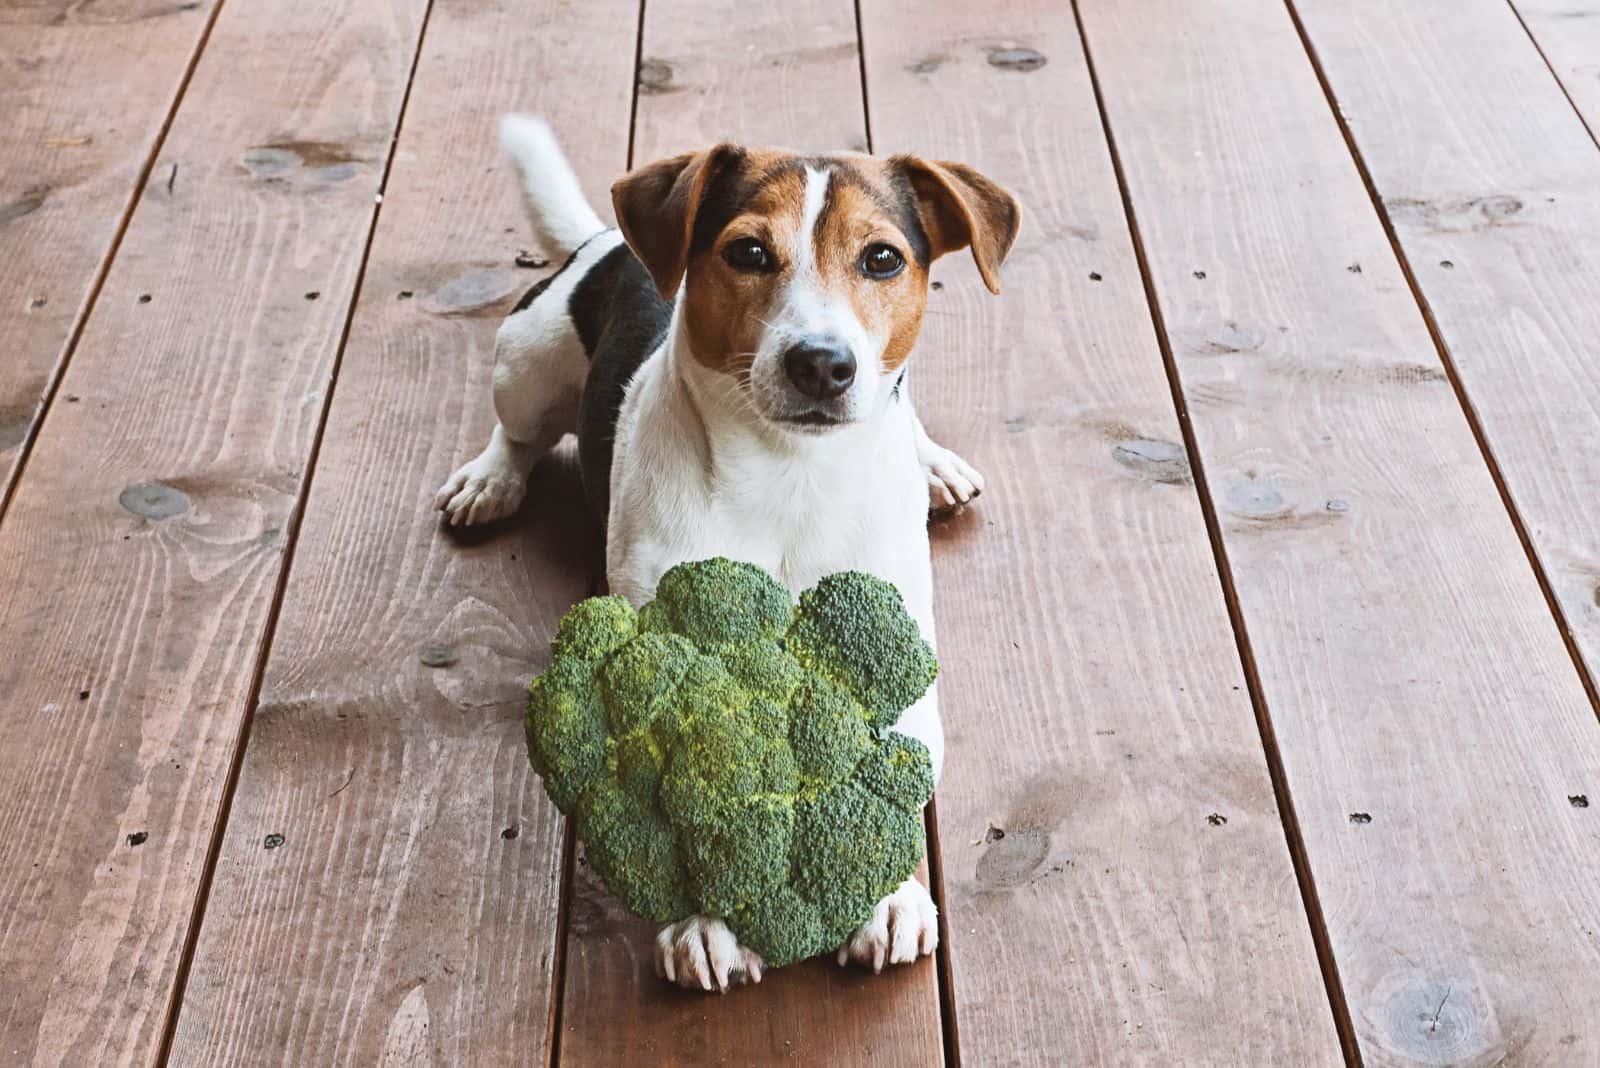 the dog is sitting next to the broccoli